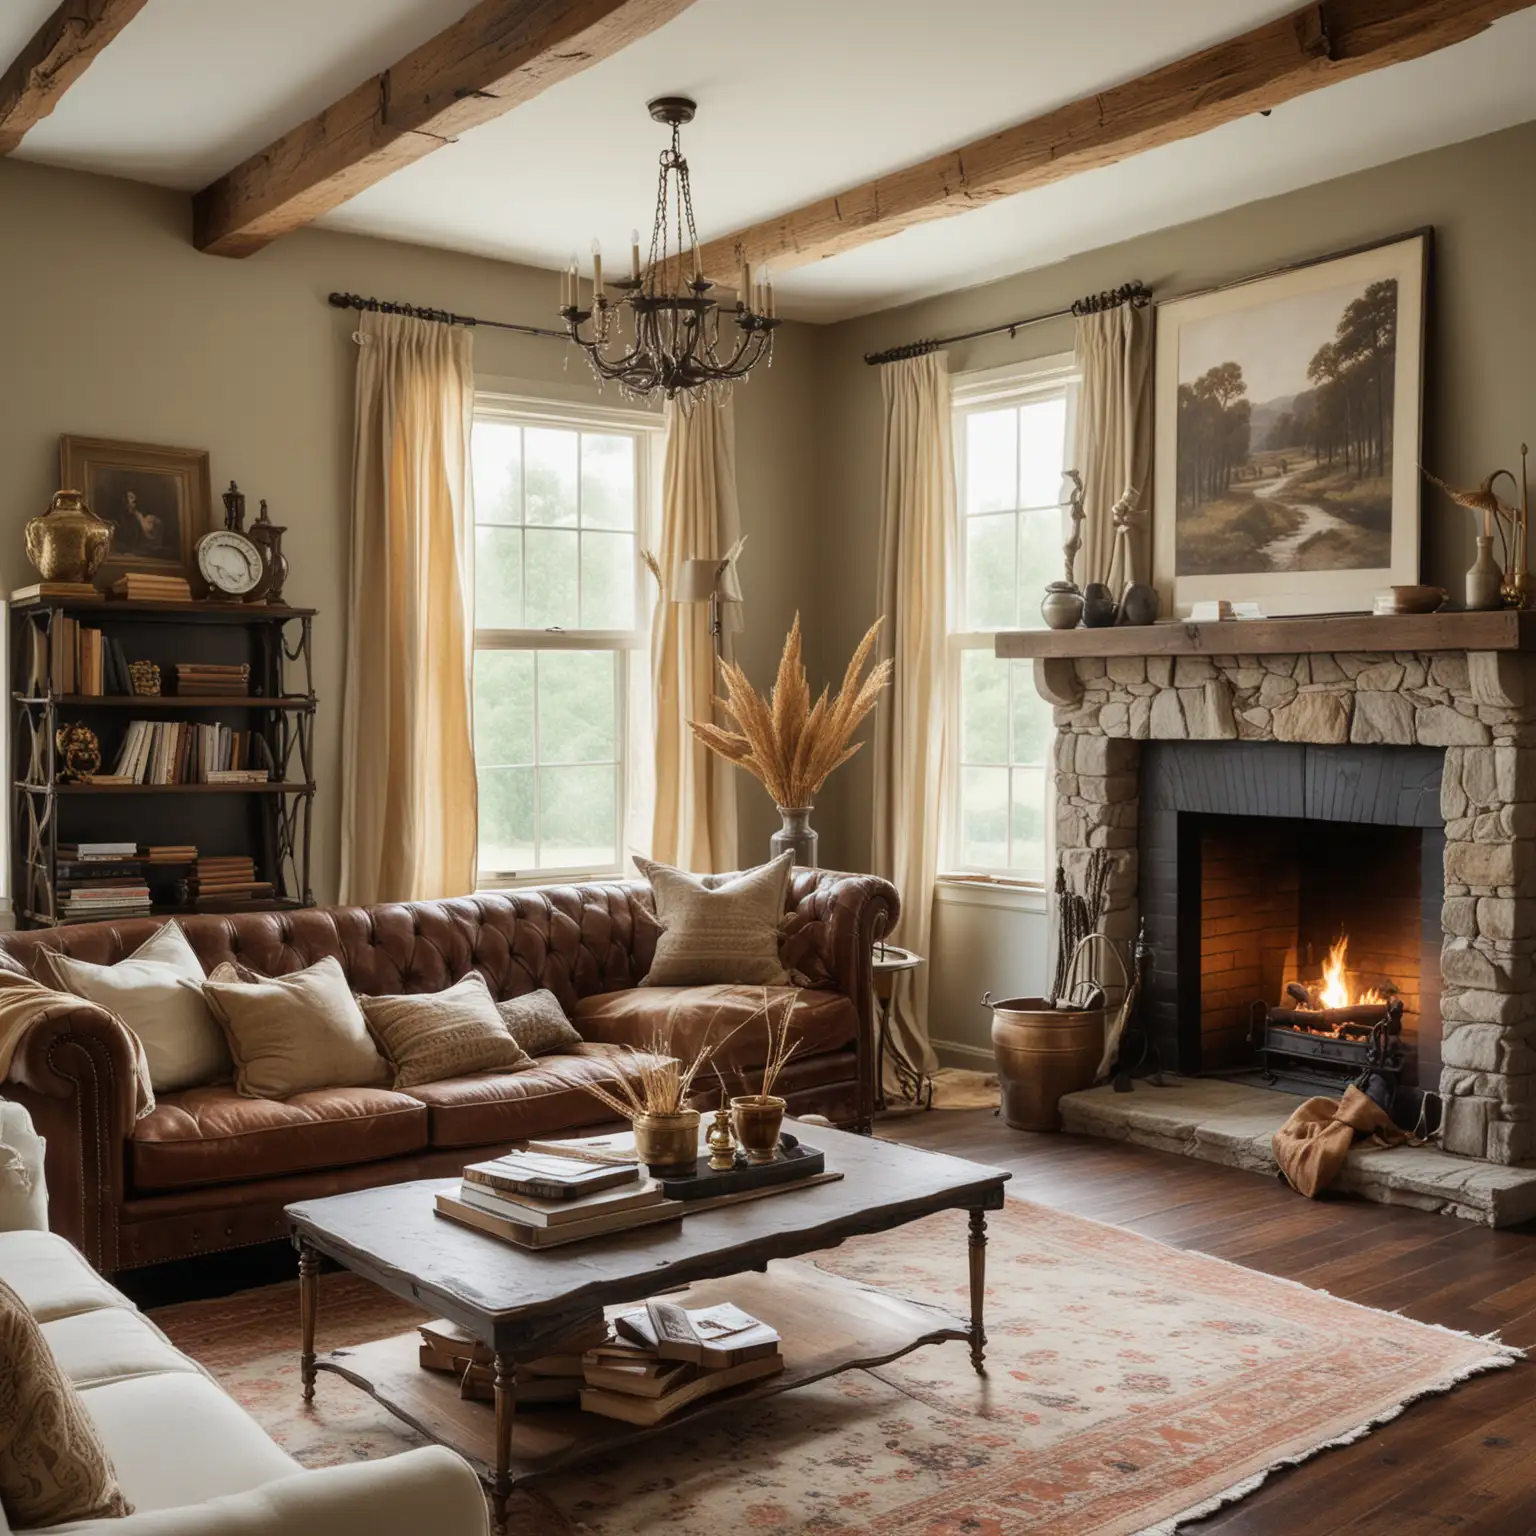 A wide shot of Elegant Farmhouse: A sophisticated farmhouse living room with dark wooden floors, a stone fireplace with a wooden mantle, and high ceilings with exposed beams. The room features a mix of classic and modern furniture, including a velvet sofa with embroidered pillows, a glass coffee table with brass accents, and an antique chandelier. Large windows with heavy linen curtains frame a picturesque landscape. A vintage side table holds a brass lamp and a stack of leather-bound books, while large ceramic vases with dried wheat stalks add a rustic touch.